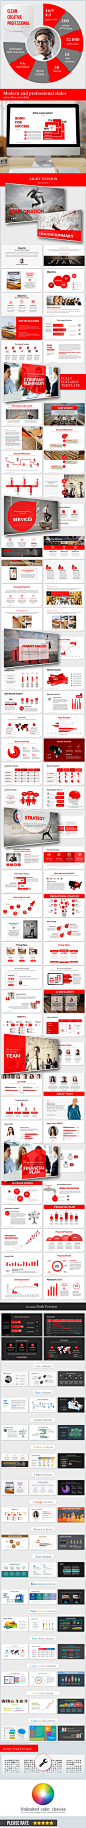 Business Plan StartRight Presentation Template - Business PowerPoint Templates